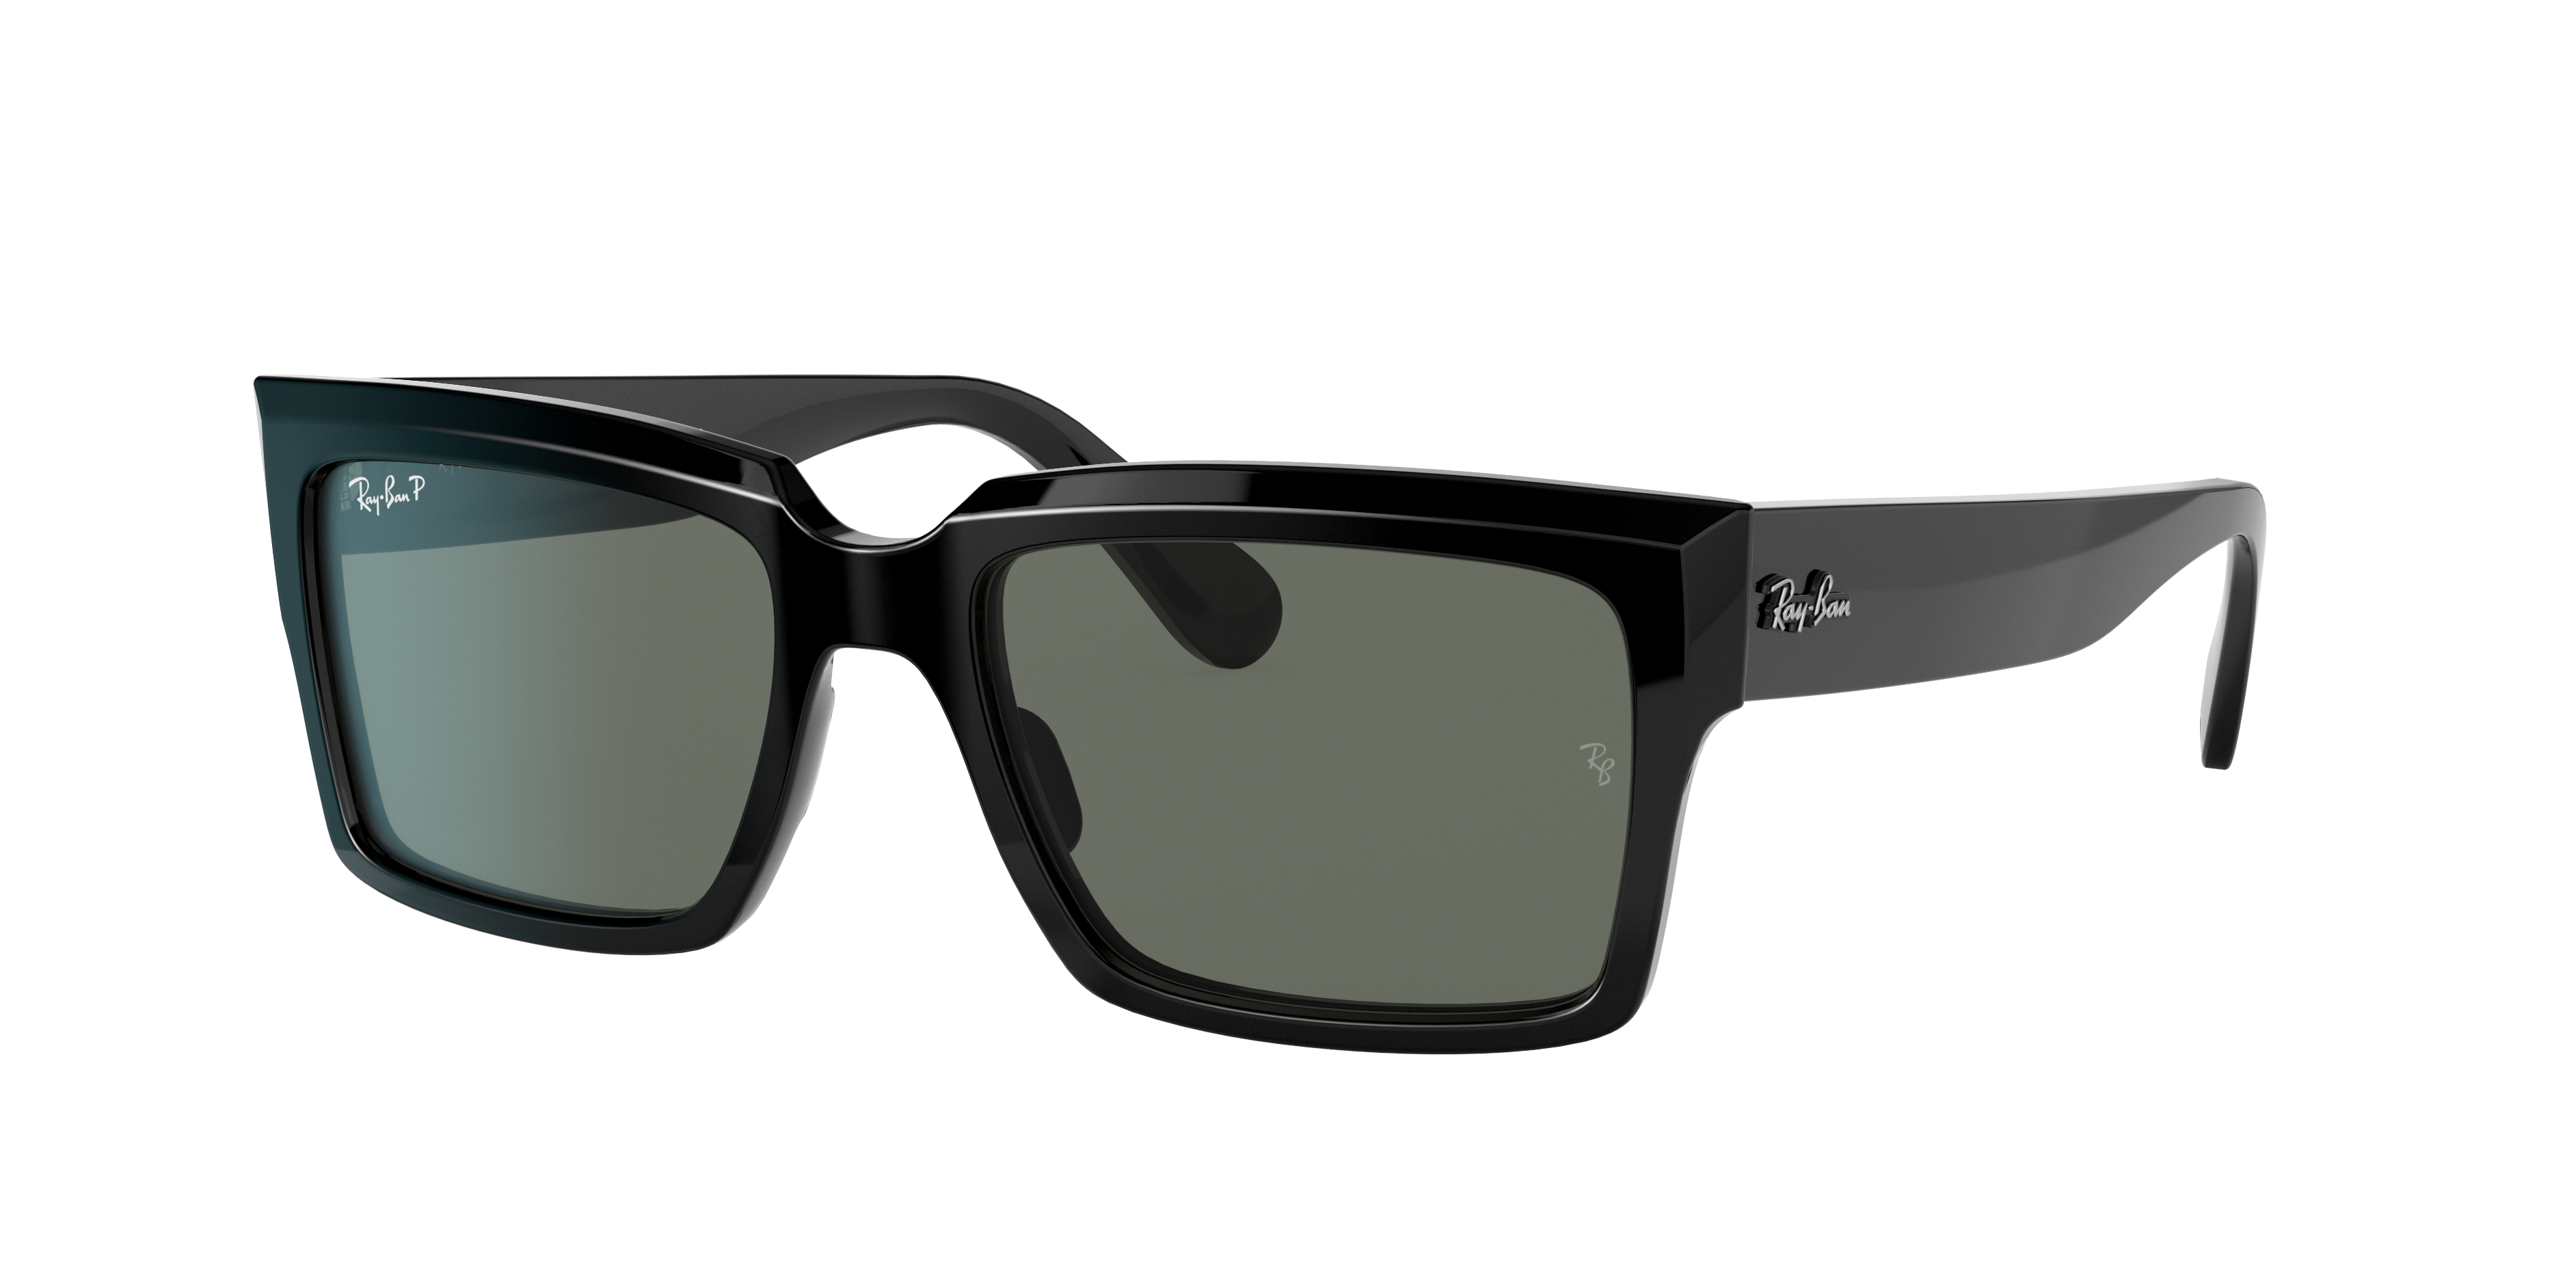 Top 61+ imagen inverness ray ban